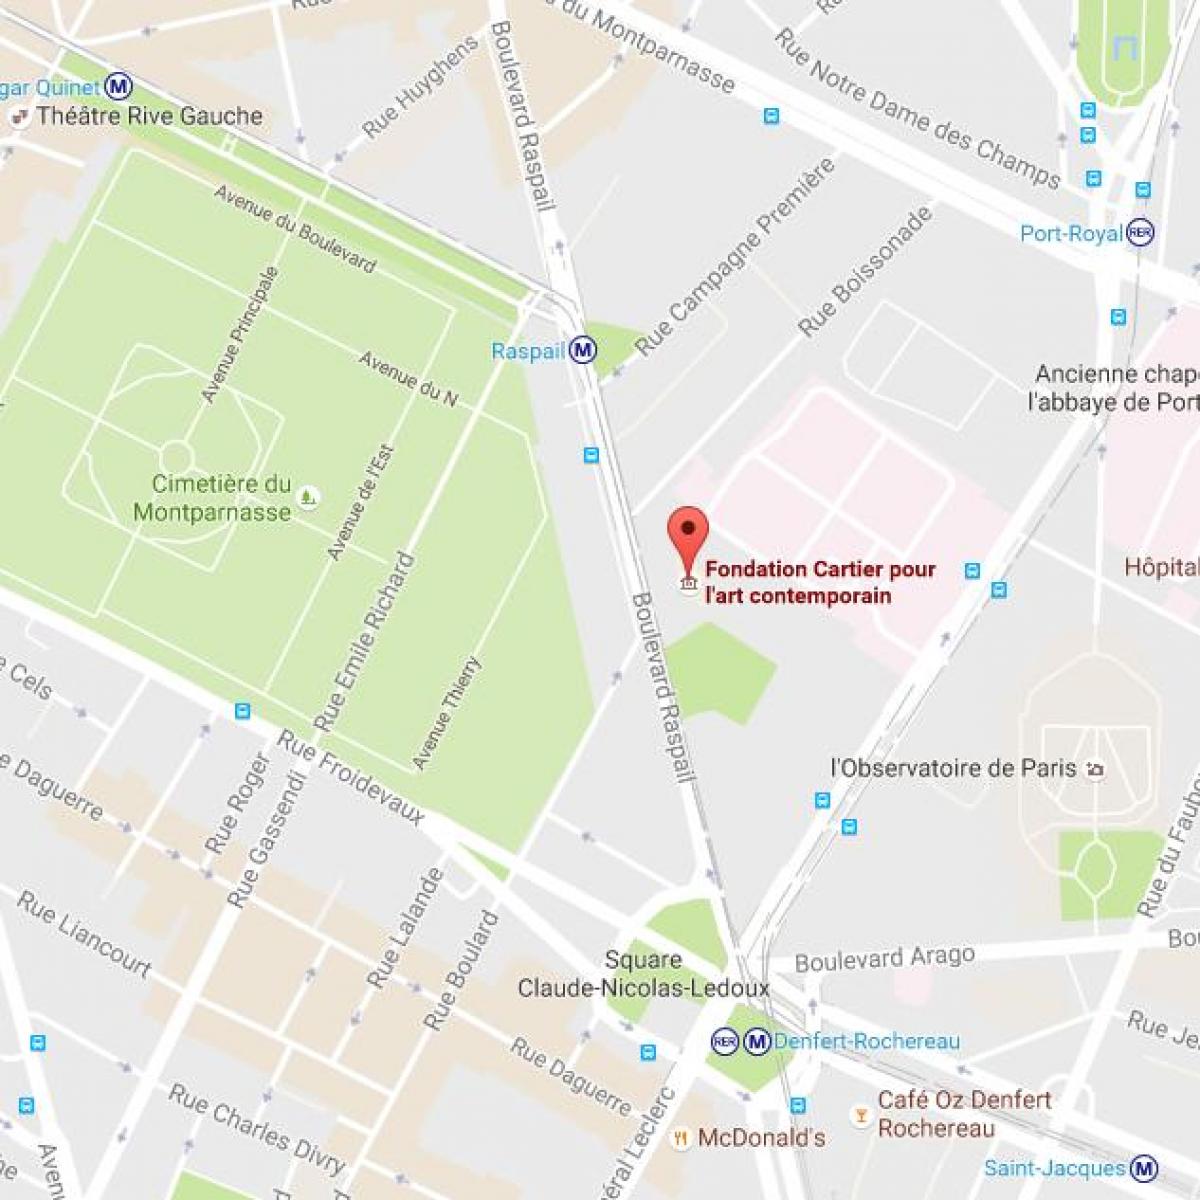 Map of the Fondation Cartier